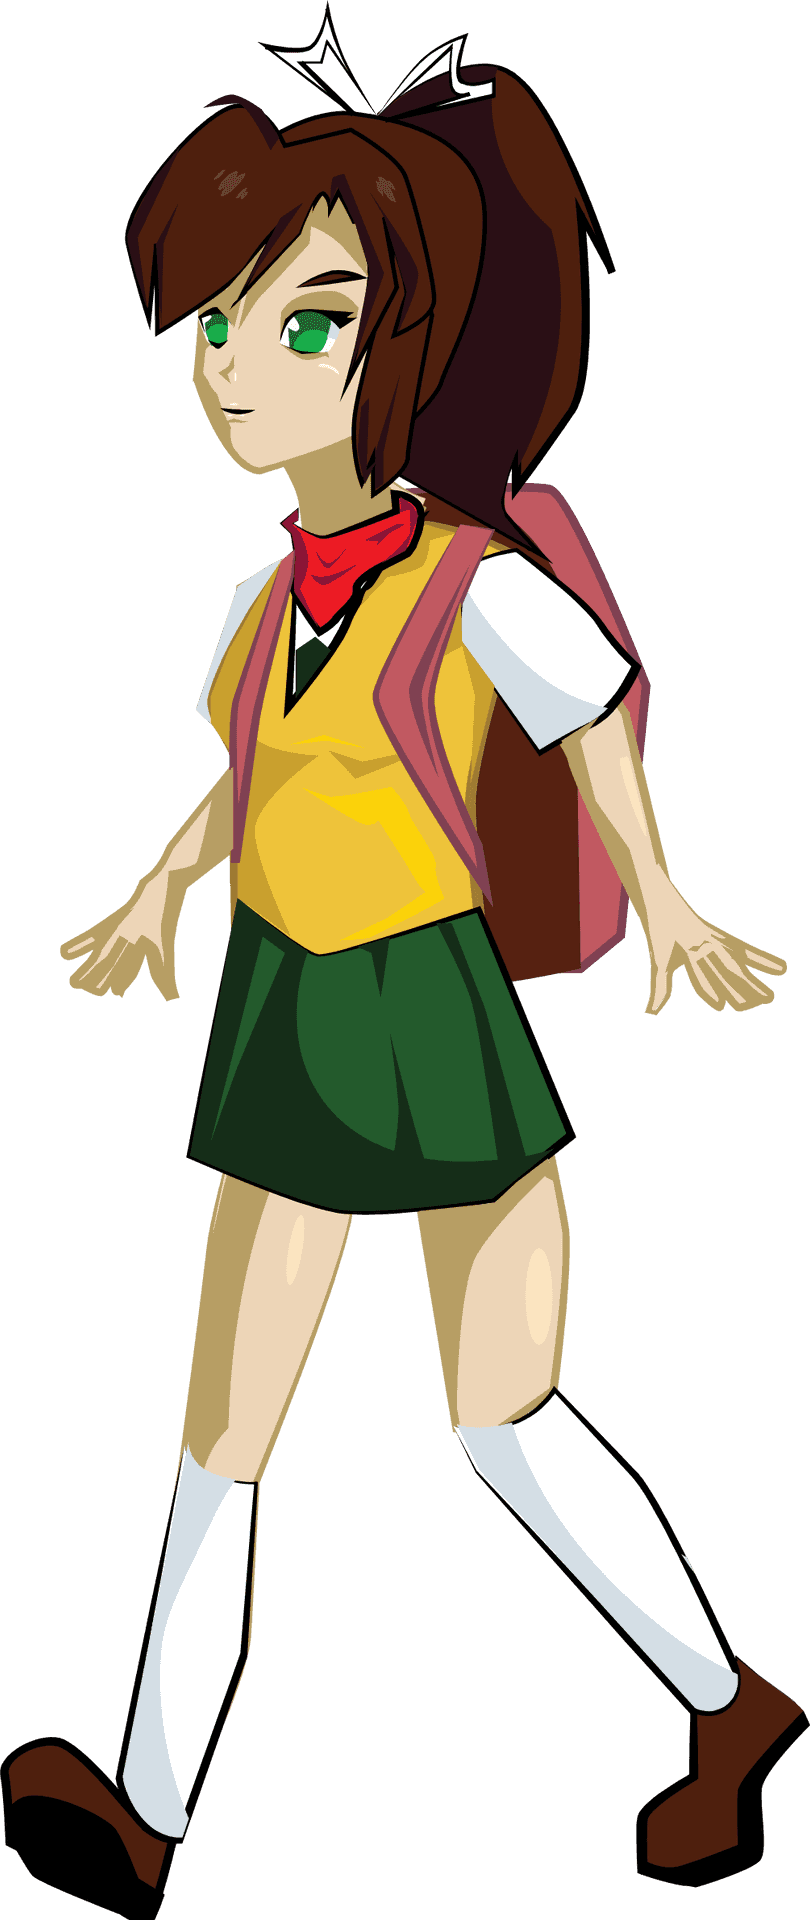 Animated Girl Walking With Backpack PNG